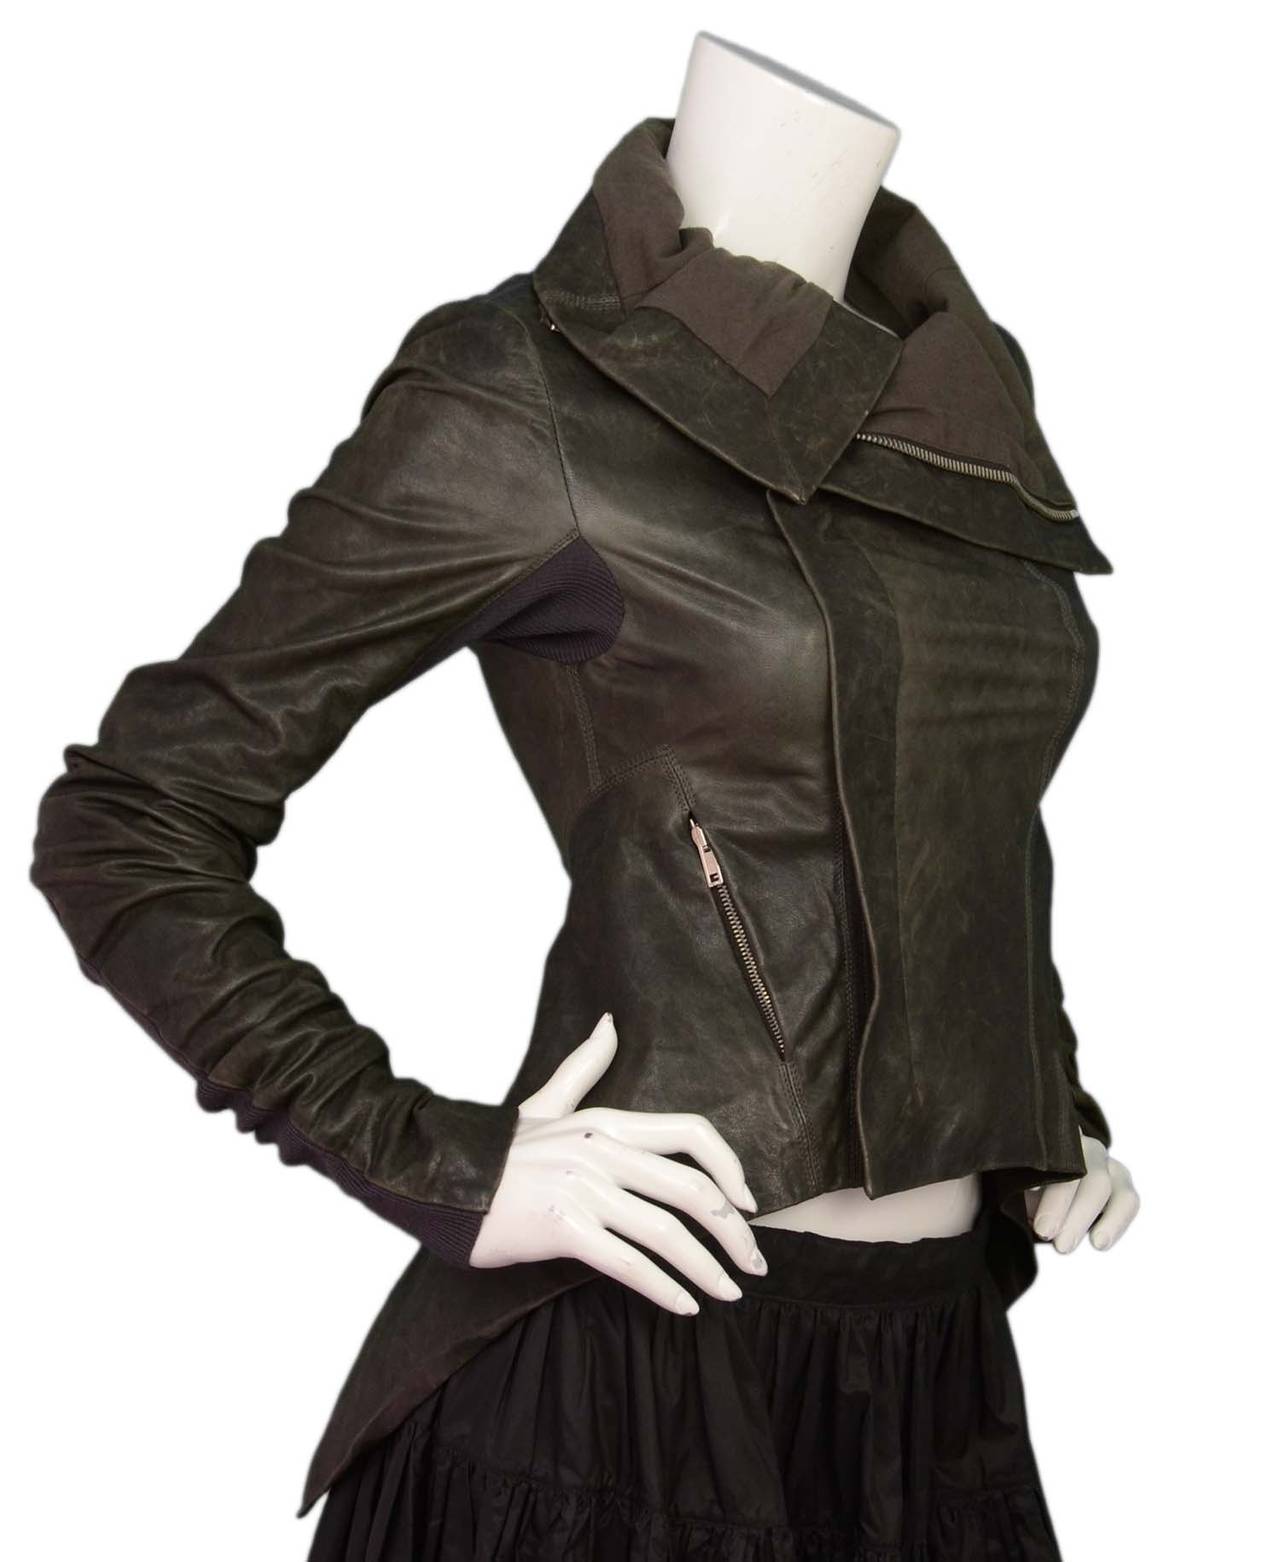 Rick Owens Brown Distressed Leather Waterfall Front Jacket
Features asymmetrical hemline

    Made in: Italy
    Color: Brown
    Composition: 90% leather, 10% wool
    Lining: Brown, 60% cotton, 40% rayon
    Closure/opening: Front diagonal